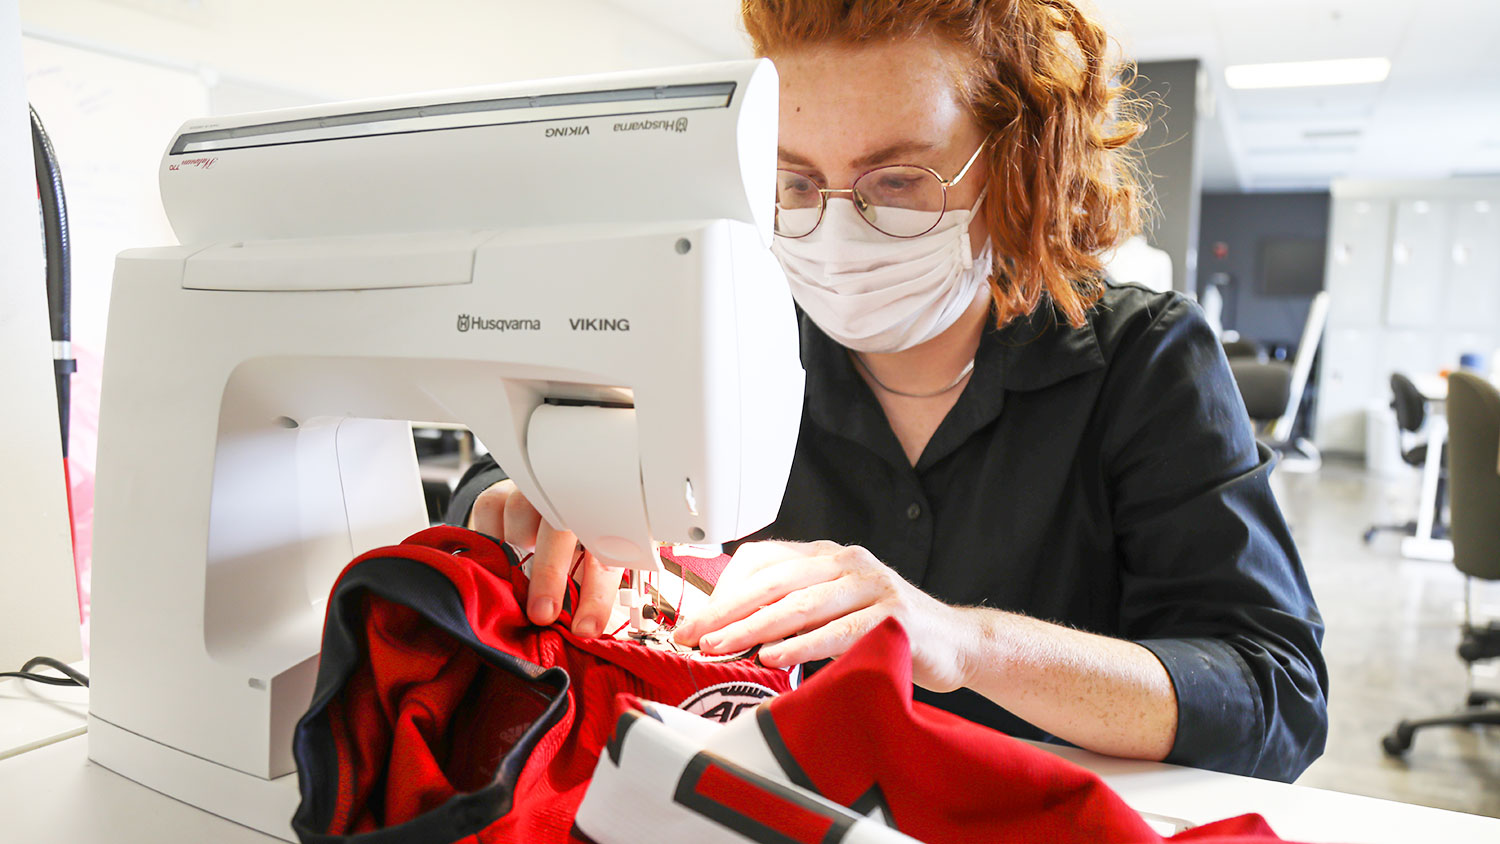 Bailey Knight sews patches onto the Wolfpack football team's uniforms